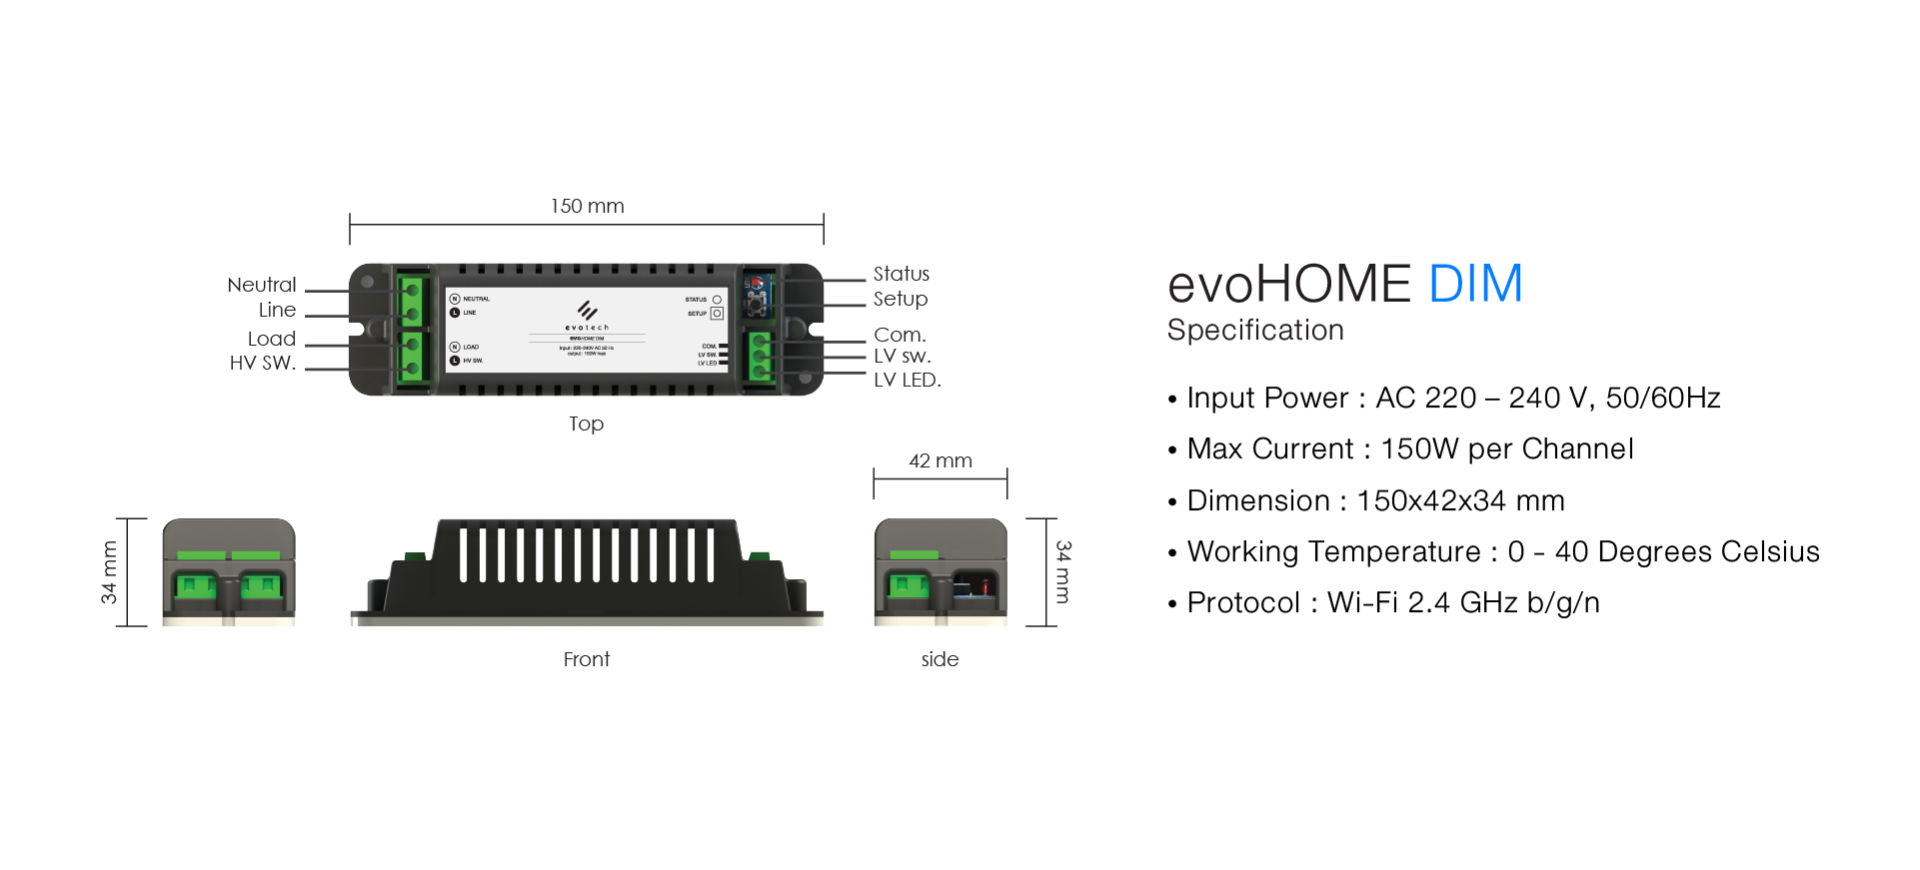 evoHOME Dimmer - Specification